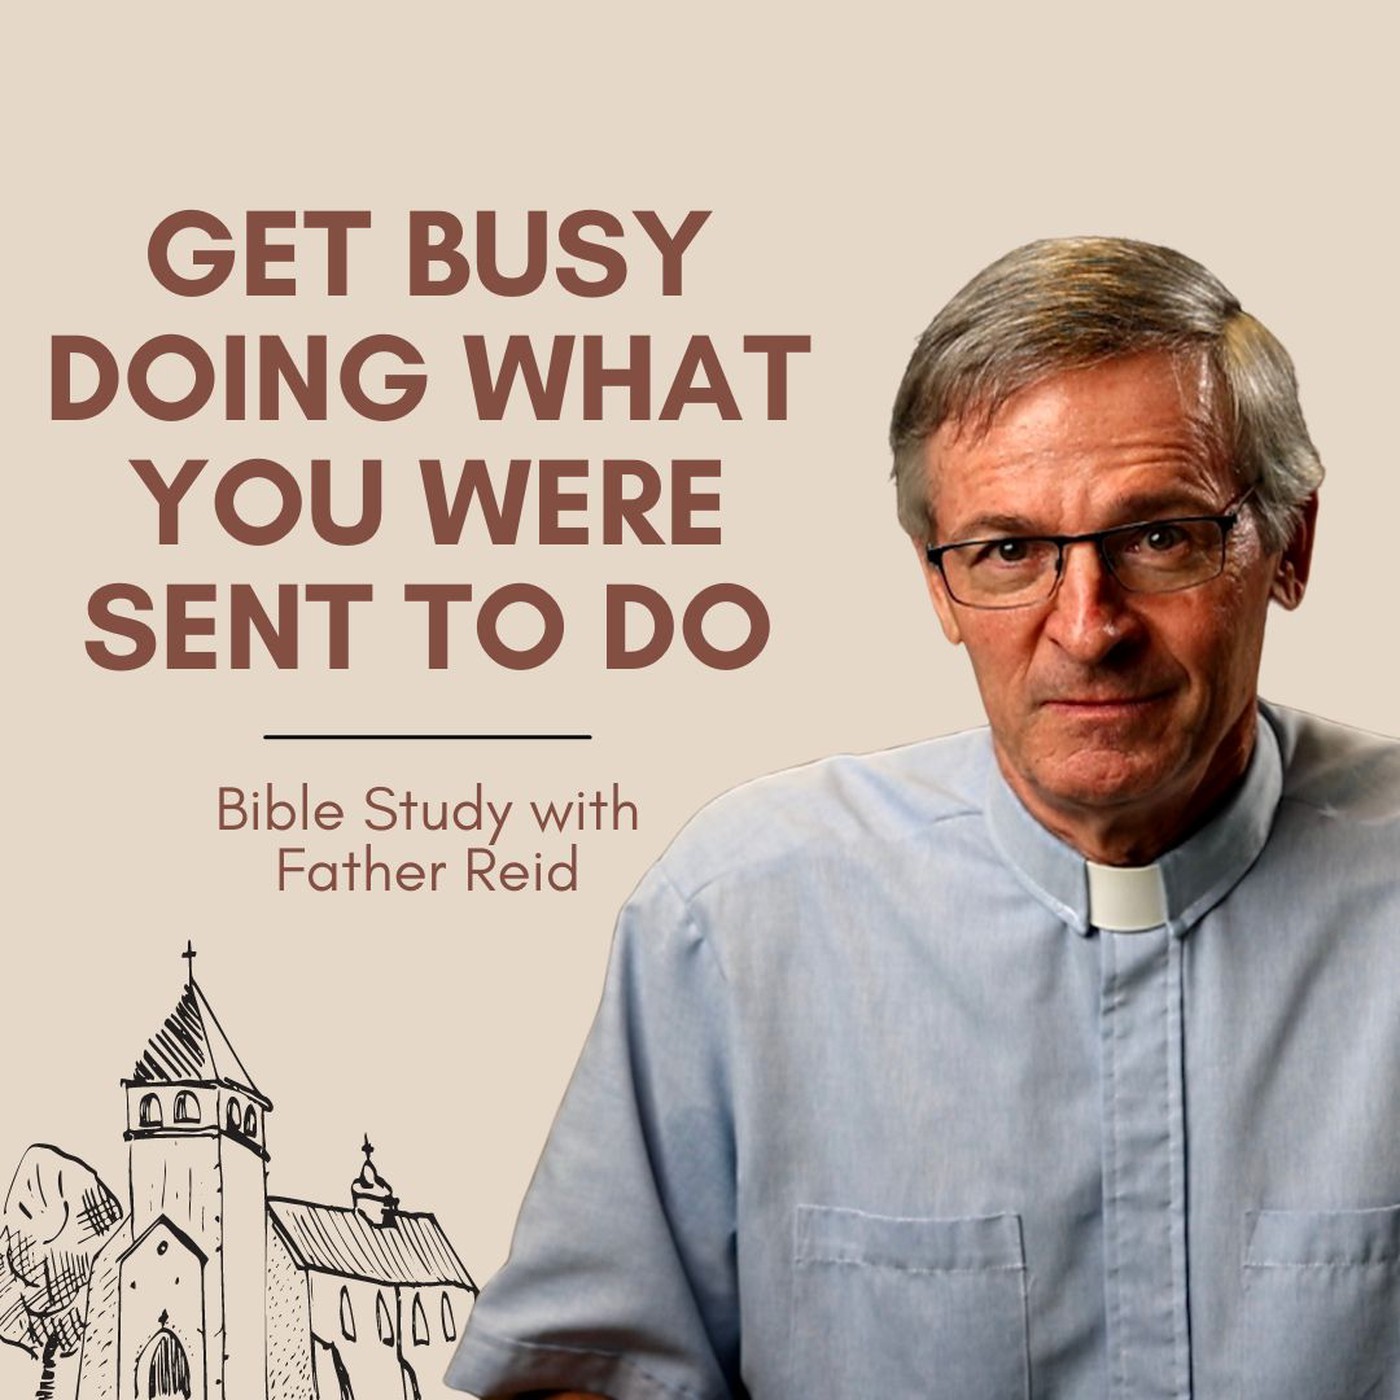 Bible Study with Father Reid